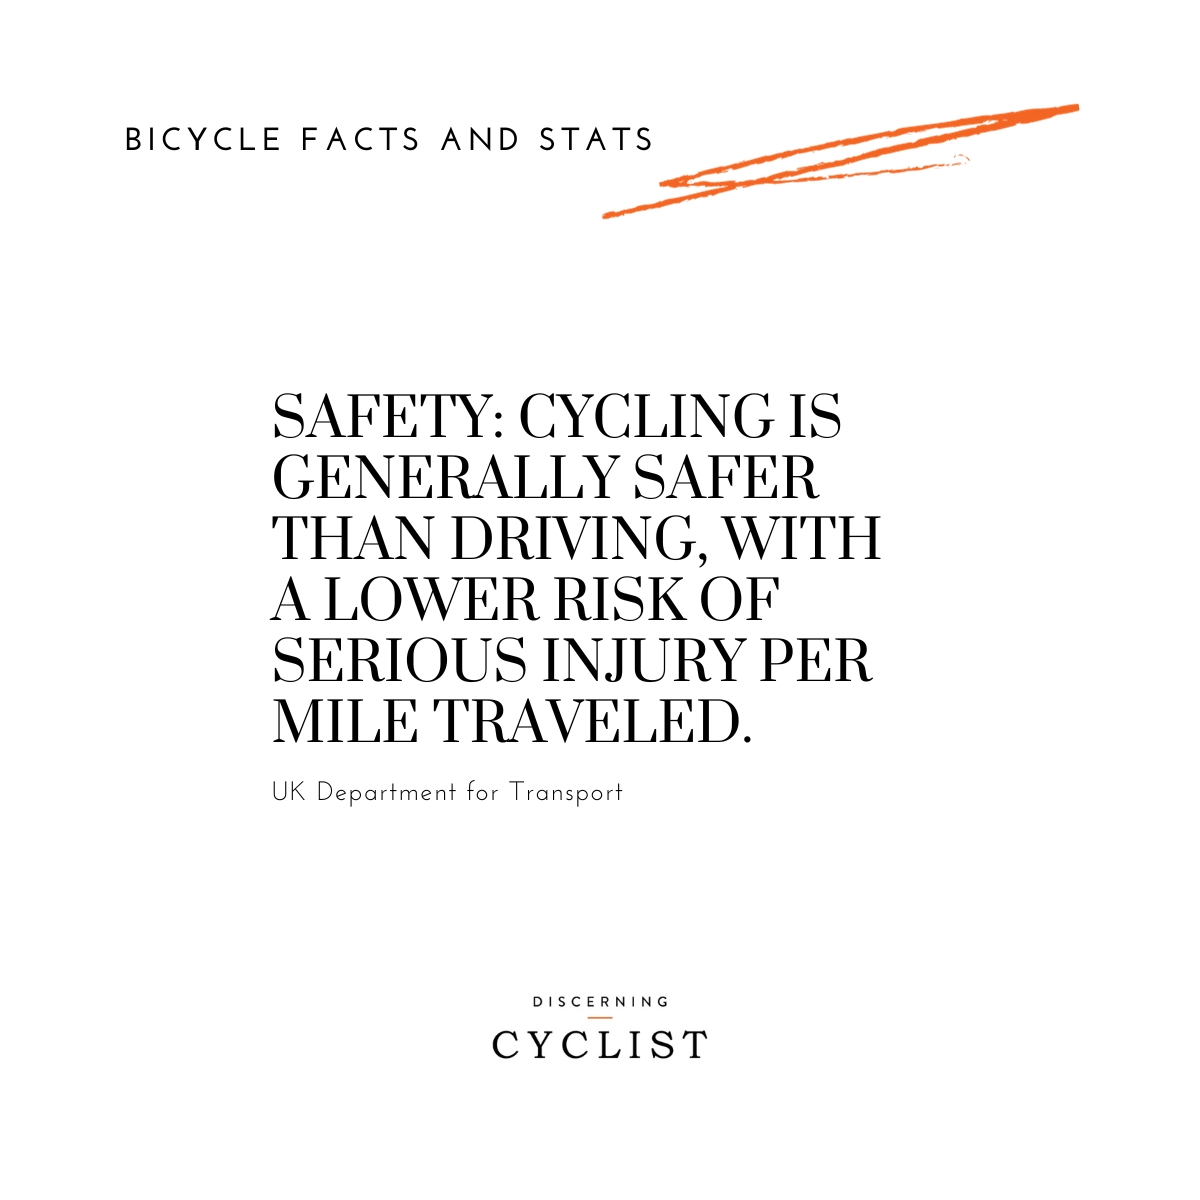 Safety: Cycling is generally safer than driving, with a lower risk of serious injury per mile travelled.